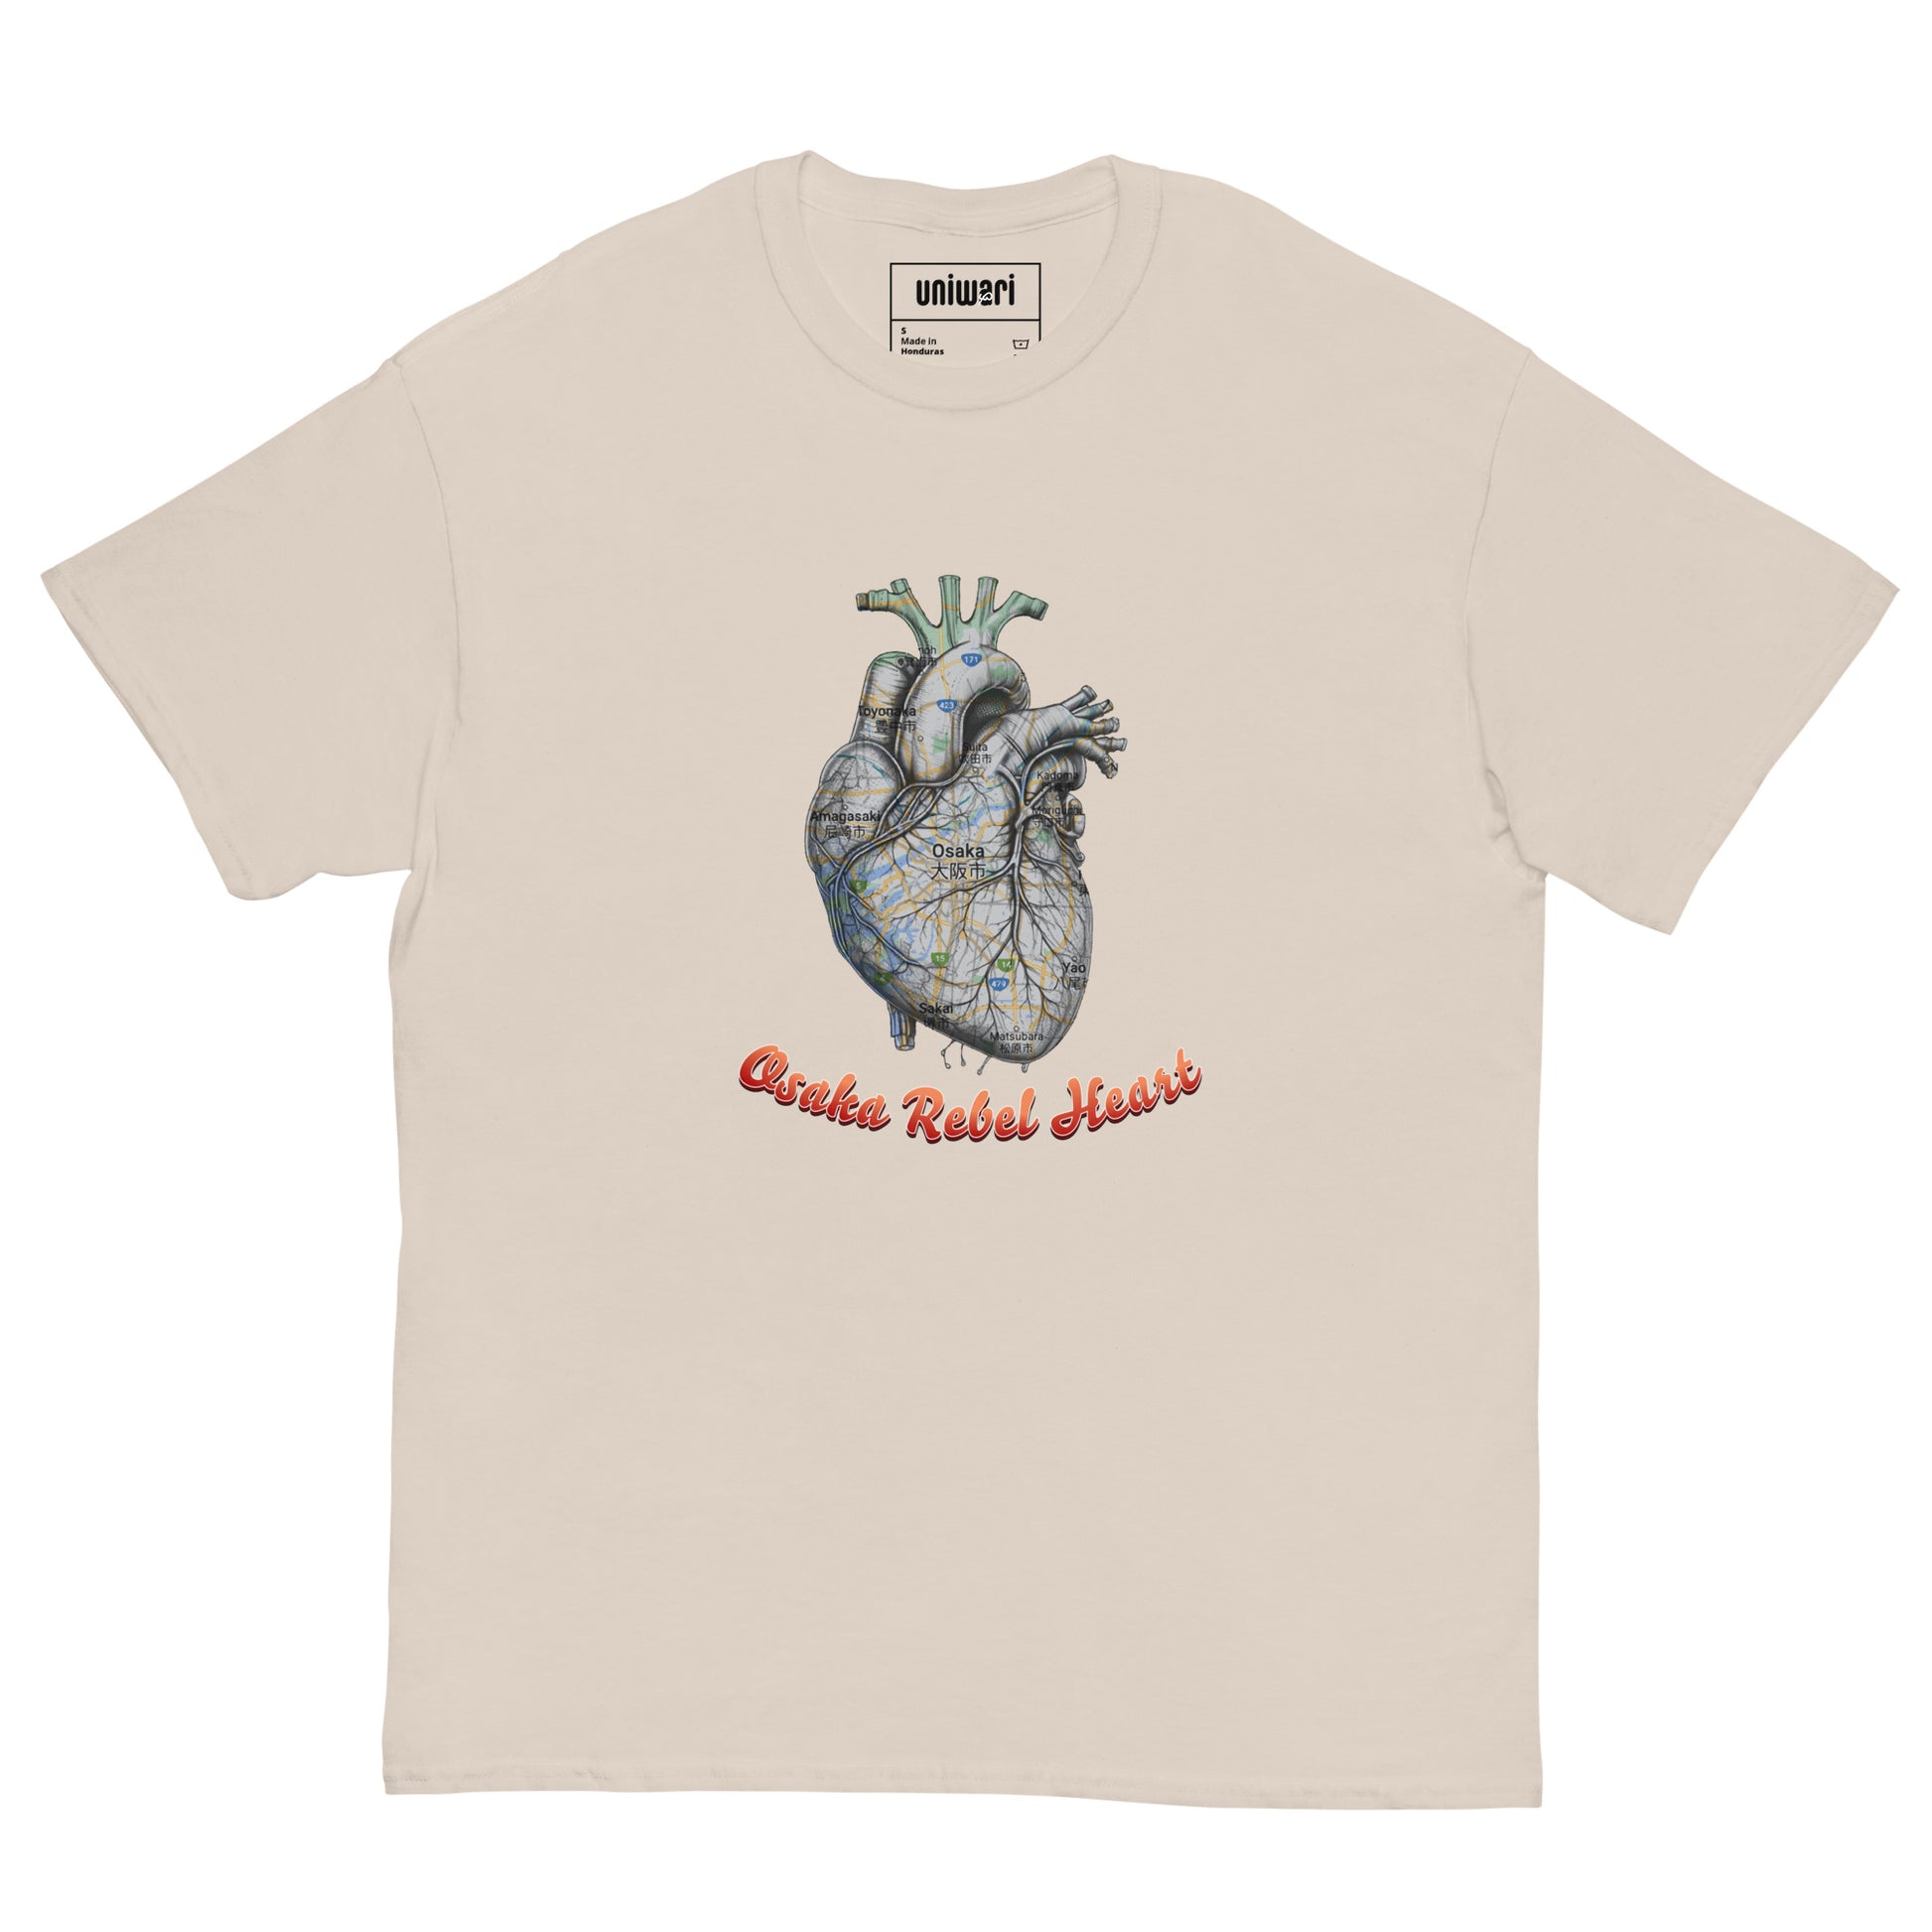 Beige High Quality Tee - Front Design with a Heart Shaped Map of Osaka and a Phrase "Osaka Rebel Heart" print